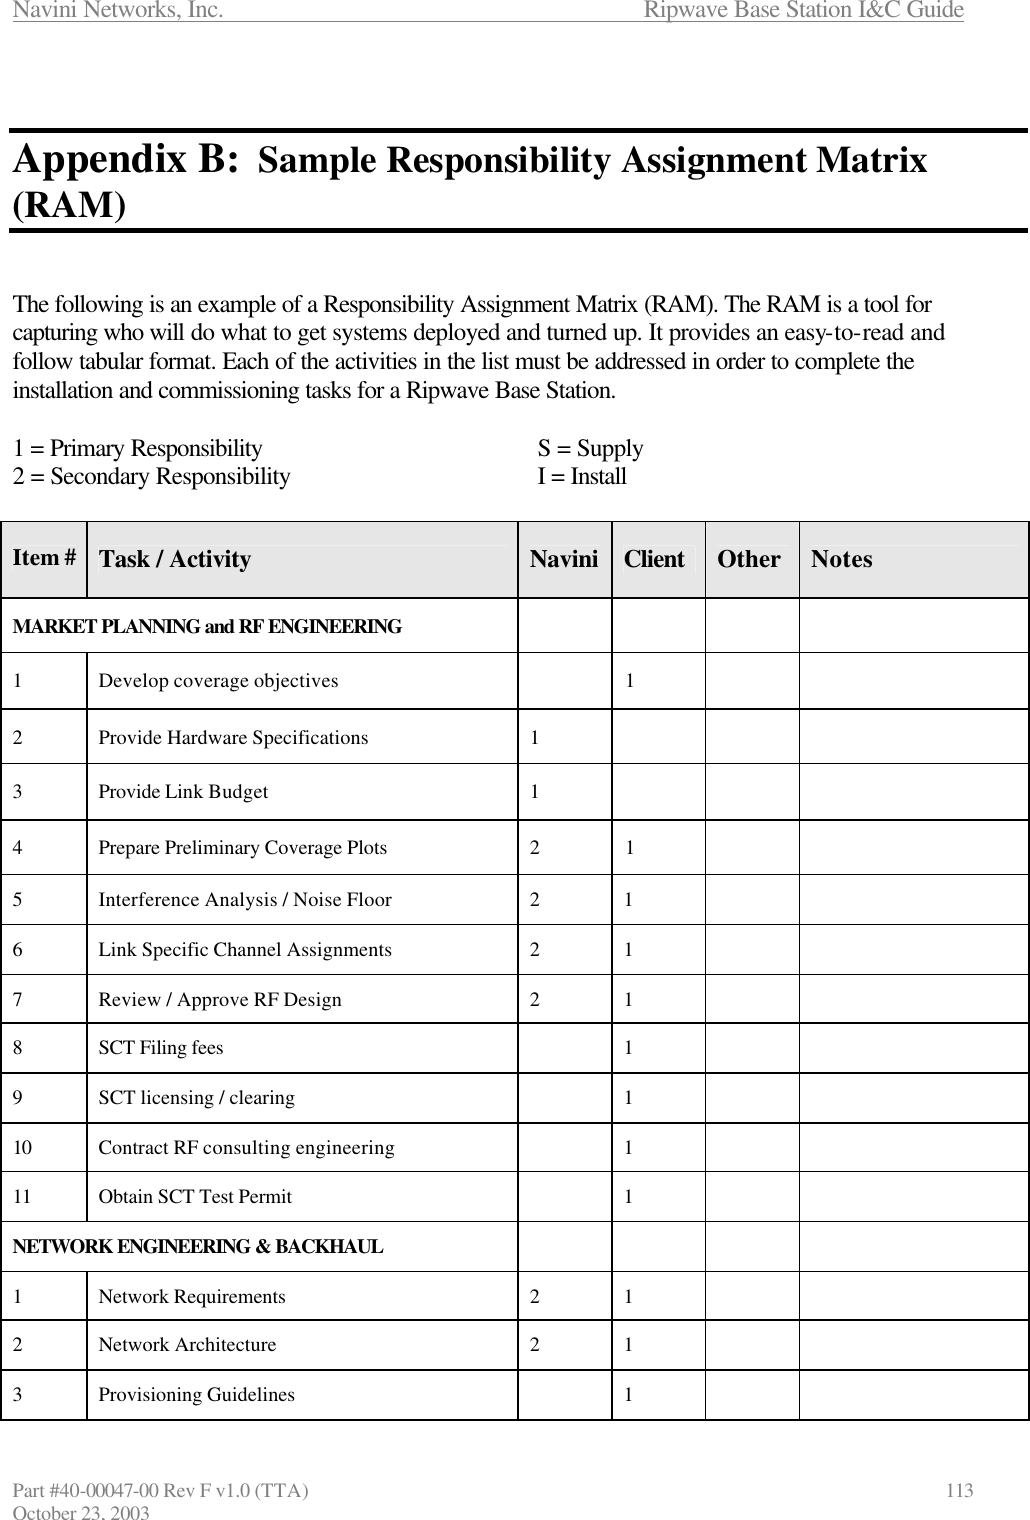 Navini Networks, Inc.                      Ripwave Base Station I&amp;C Guide Part #40-00047-00 Rev F v1.0 (TTA)                            113 October 23, 2003   Appendix B:  Sample Responsibility Assignment Matrix (RAM)   The following is an example of a Responsibility Assignment Matrix (RAM). The RAM is a tool for capturing who will do what to get systems deployed and turned up. It provides an easy-to-read and follow tabular format. Each of the activities in the list must be addressed in order to complete the installation and commissioning tasks for a Ripwave Base Station.  1 = Primary Responsibility    S = Supply 2 = Secondary Responsibility    I = Install  Item # Task / Activity Navini Client Other Notes MARKET PLANNING and RF ENGINEERING        1 Develop coverage objectives    1     2 Provide Hardware Specifications 1       3 Provide Link Budget 1       4 Prepare Preliminary Coverage Plots 2 1     5 Interference Analysis / Noise Floor 2 1     6 Link Specific Channel Assignments 2 1     7 Review / Approve RF Design 2 1     8 SCT Filing fees    1     9 SCT licensing / clearing    1     10 Contract RF consulting engineering    1     11 Obtain SCT Test Permit    1     NETWORK ENGINEERING &amp; BACKHAUL     1 Network Requirements 2 1     2 Network Architecture 2 1     3 Provisioning Guidelines    1     